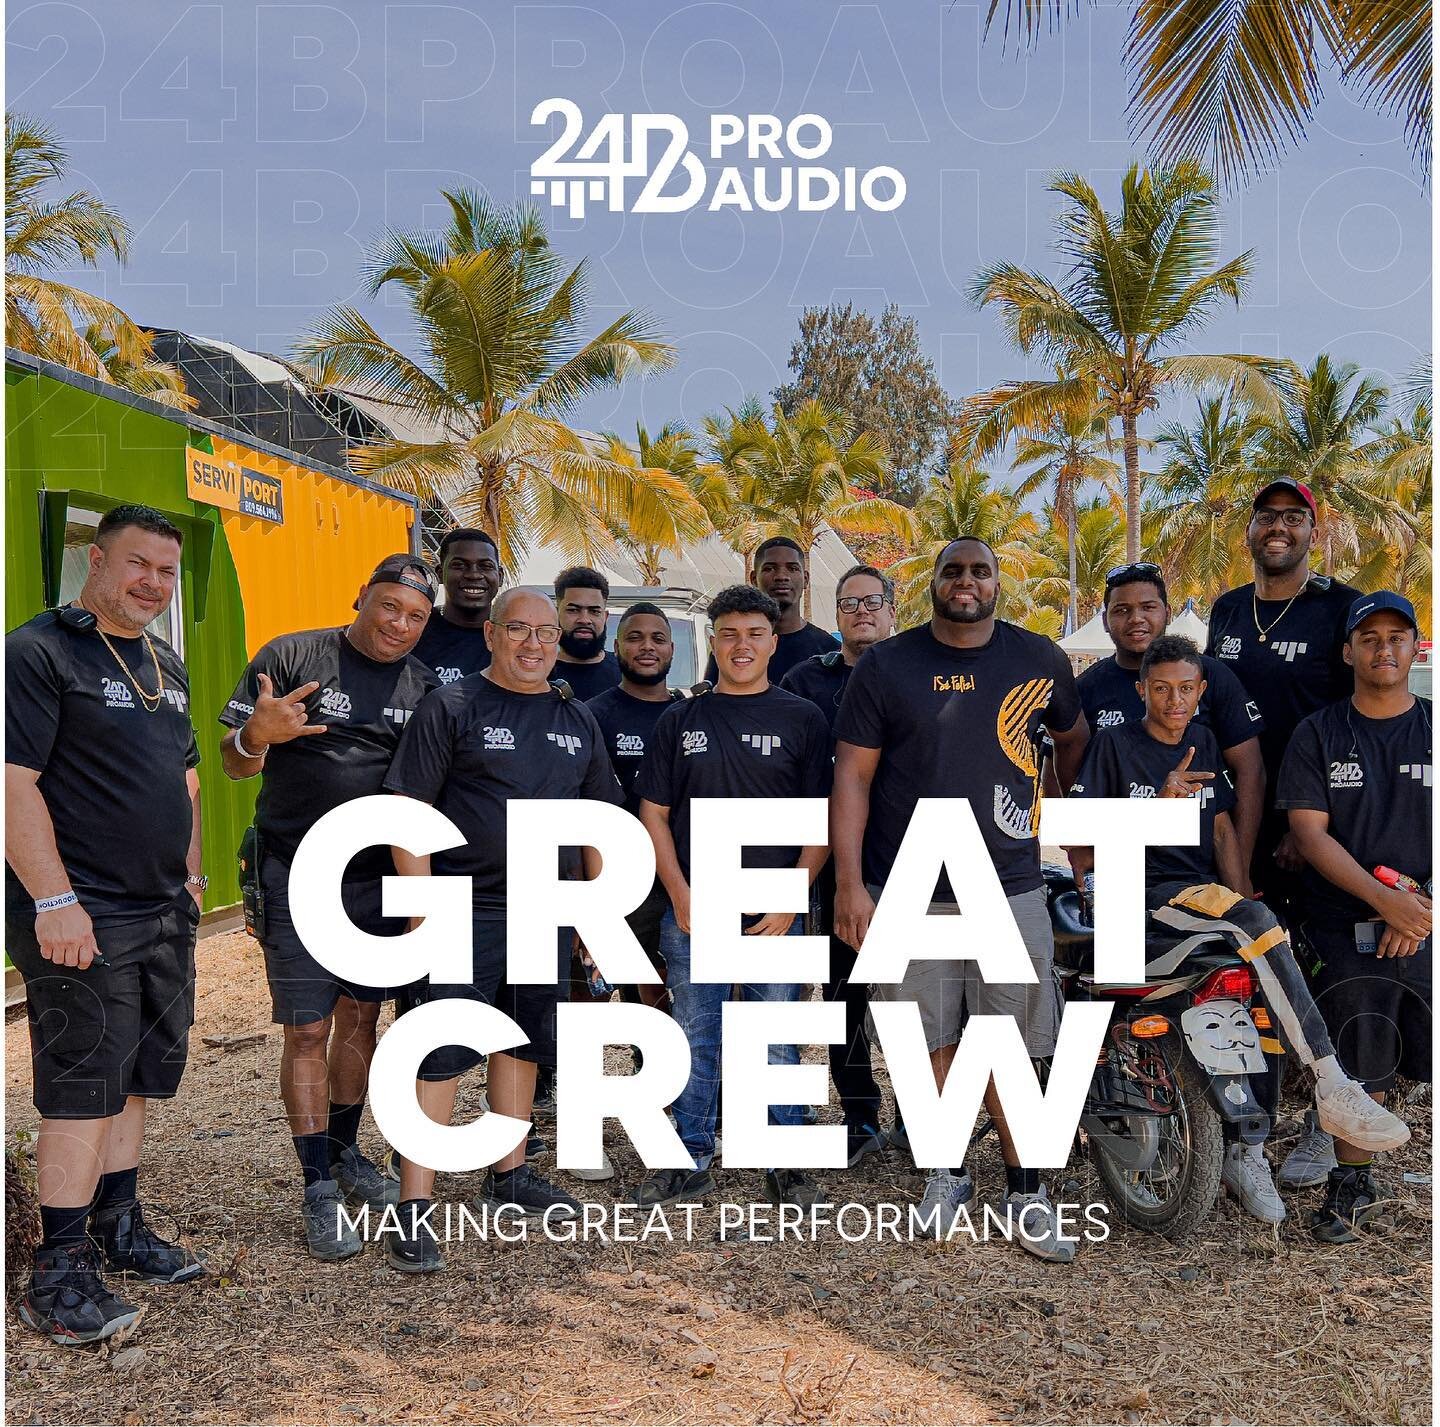 We thank our incredible team for their effort, dedication, hard work, and unwavering commitment to achieve excellence during our shows. 💯

#24BProAudio #IsleOfLight #ProCrew #flashbackfriday #fbf